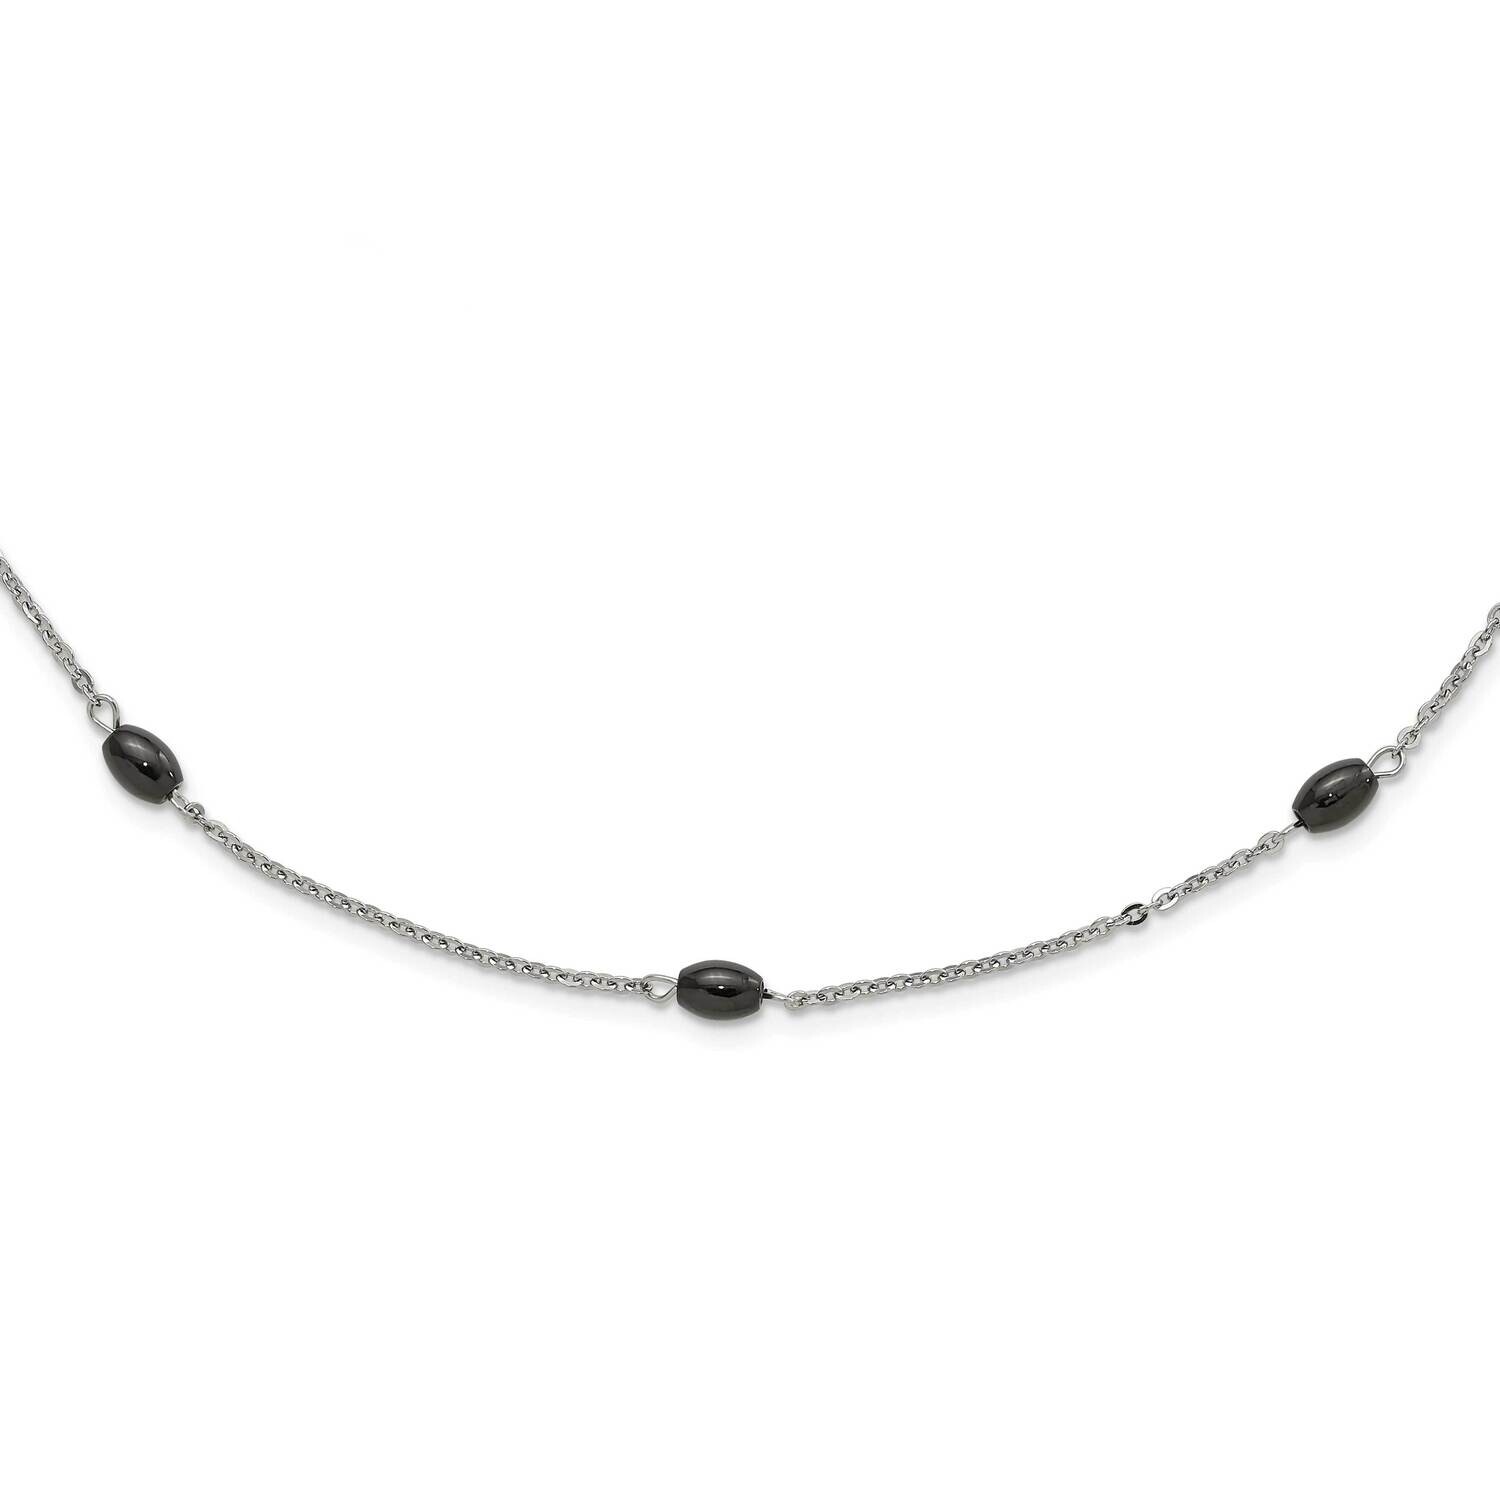 Ip Black-Plated Beads Station Necklace Stainless Steel SRN918-62